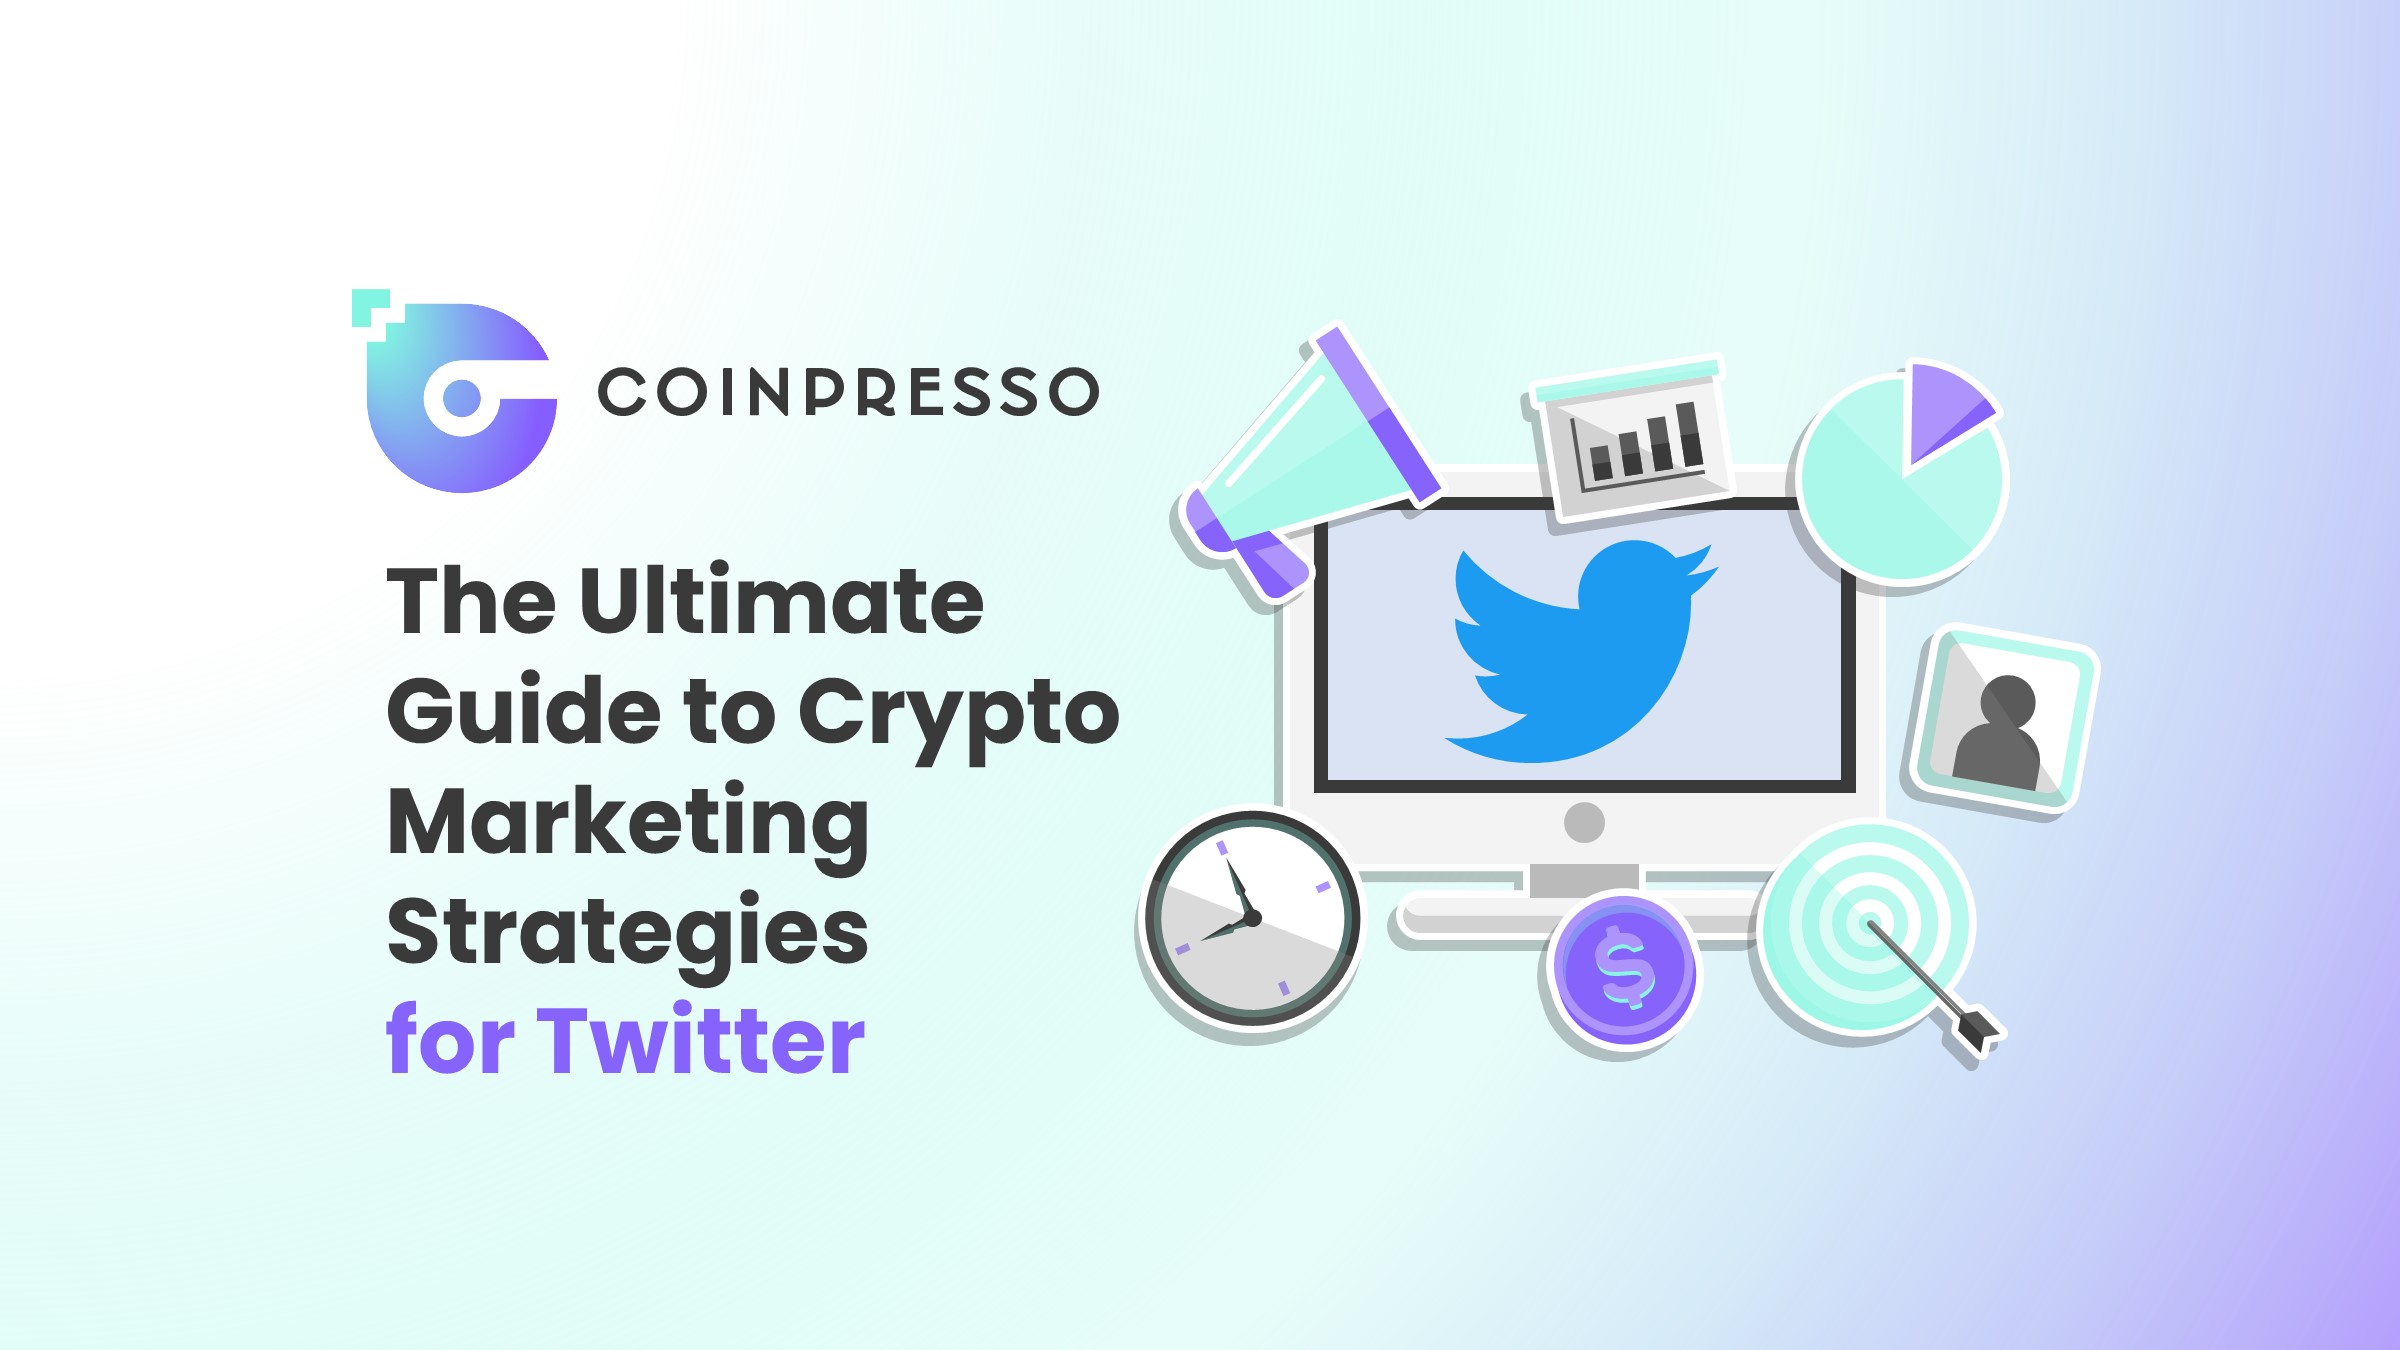 The Ultimate Guide to Crypto Marketing Strategies